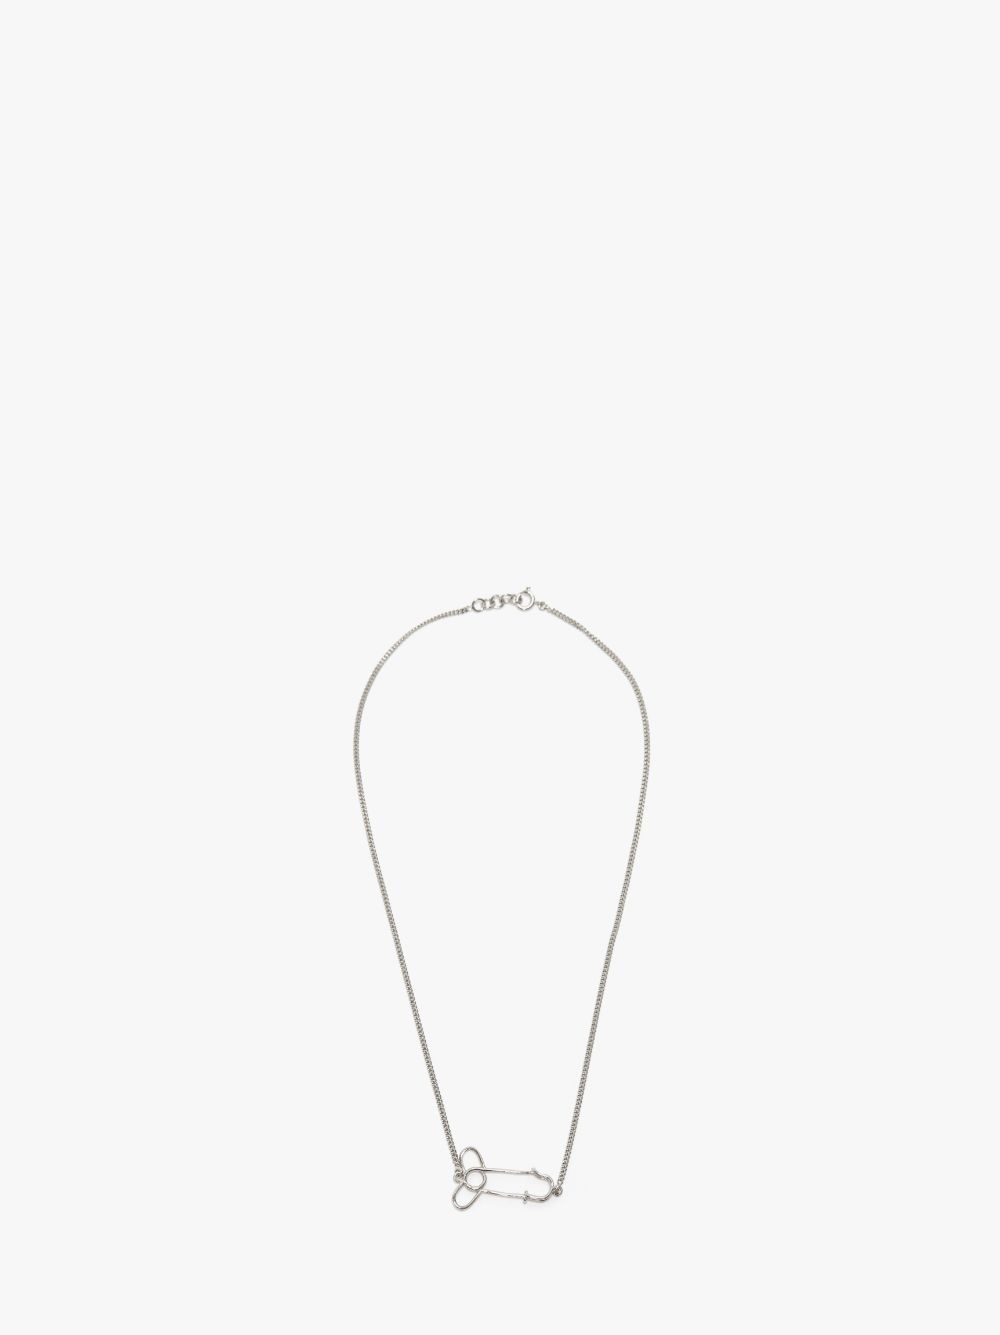 PENIS PIN PENDANT NECKLACE - 1